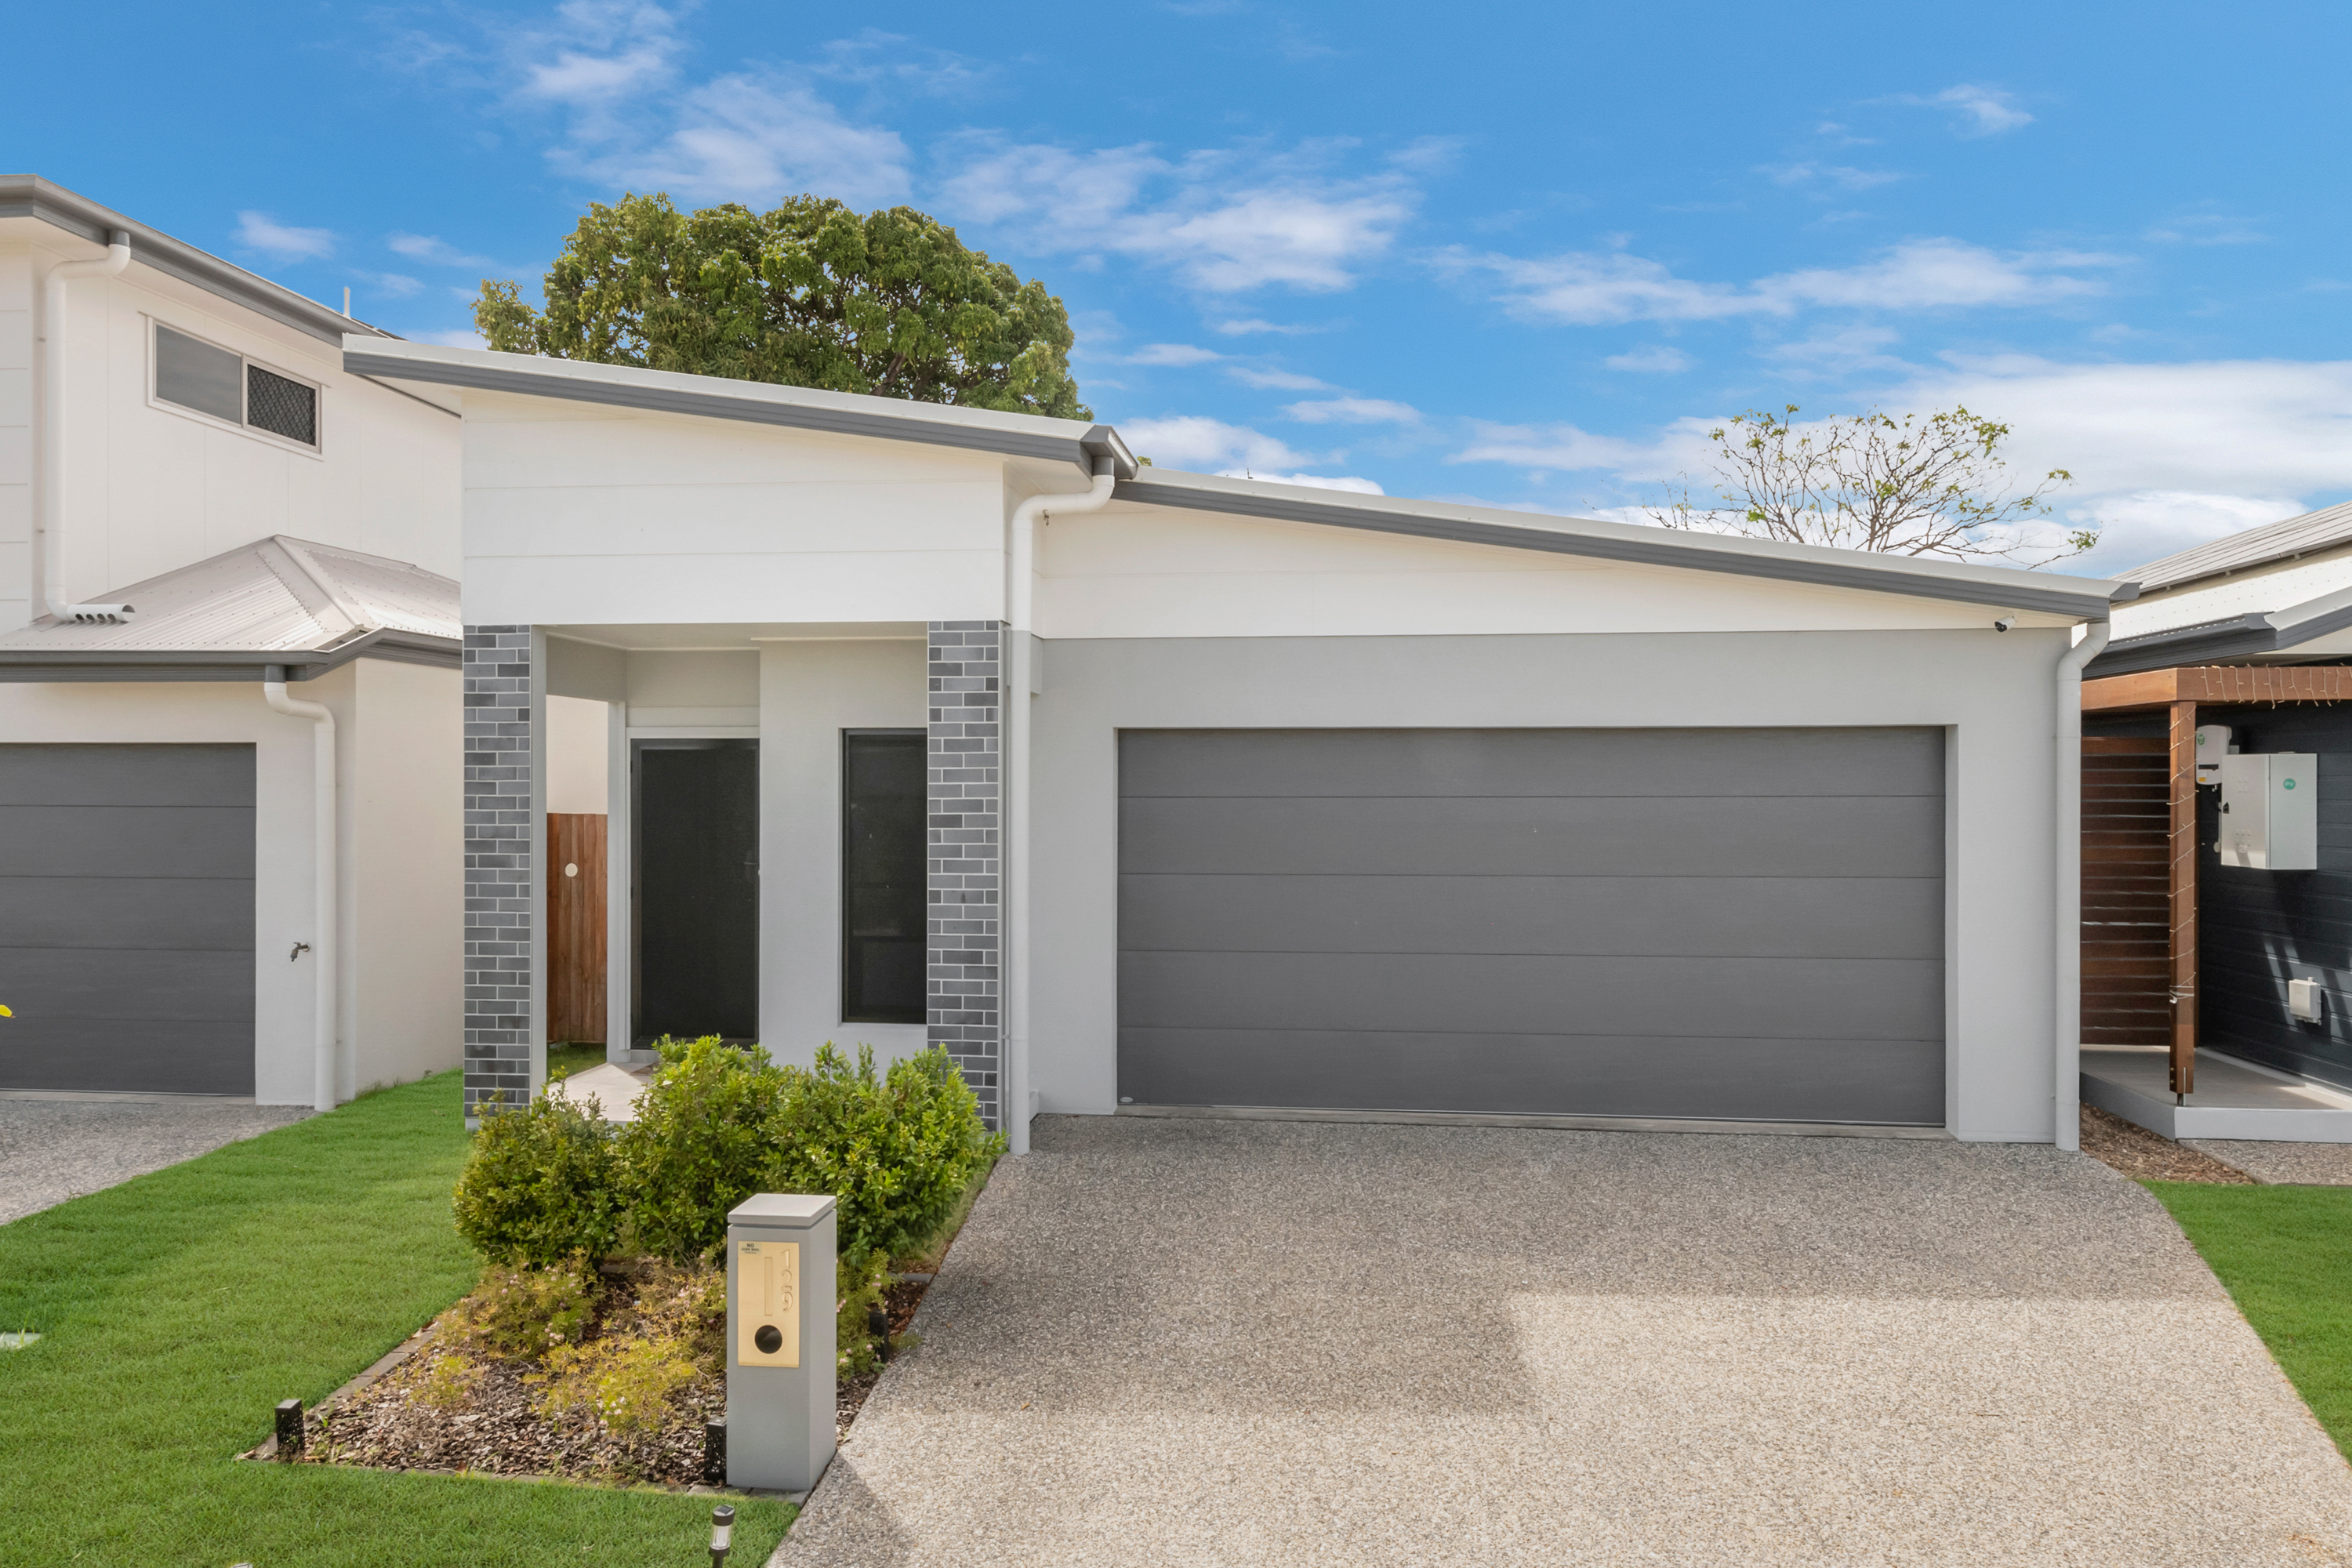 Leased House 129 Havenside Drive, Garbutt QLD 4814 - Nov 21, 2022 - Homely